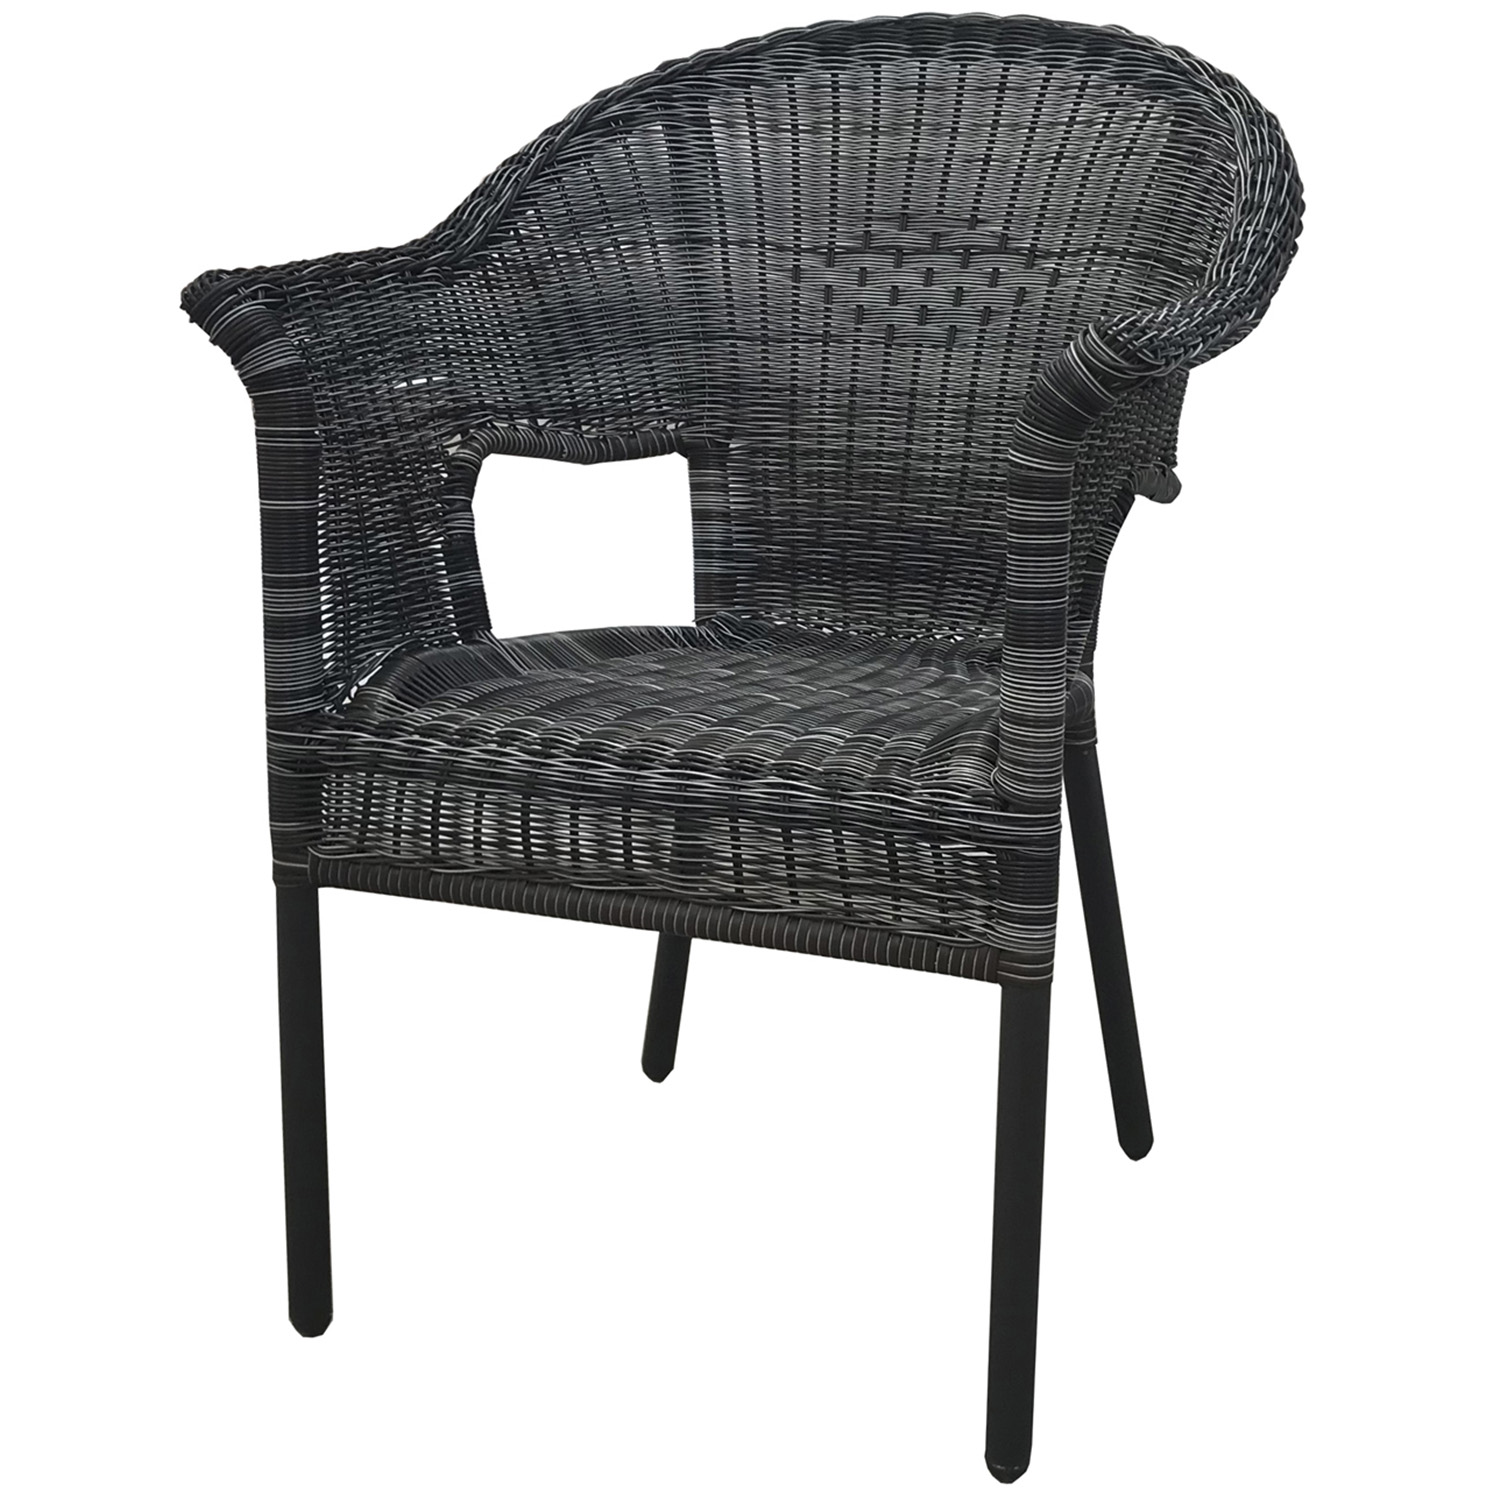 Malay Deluxe Outdoor Essentials Padstow Wicker Chair Image 2